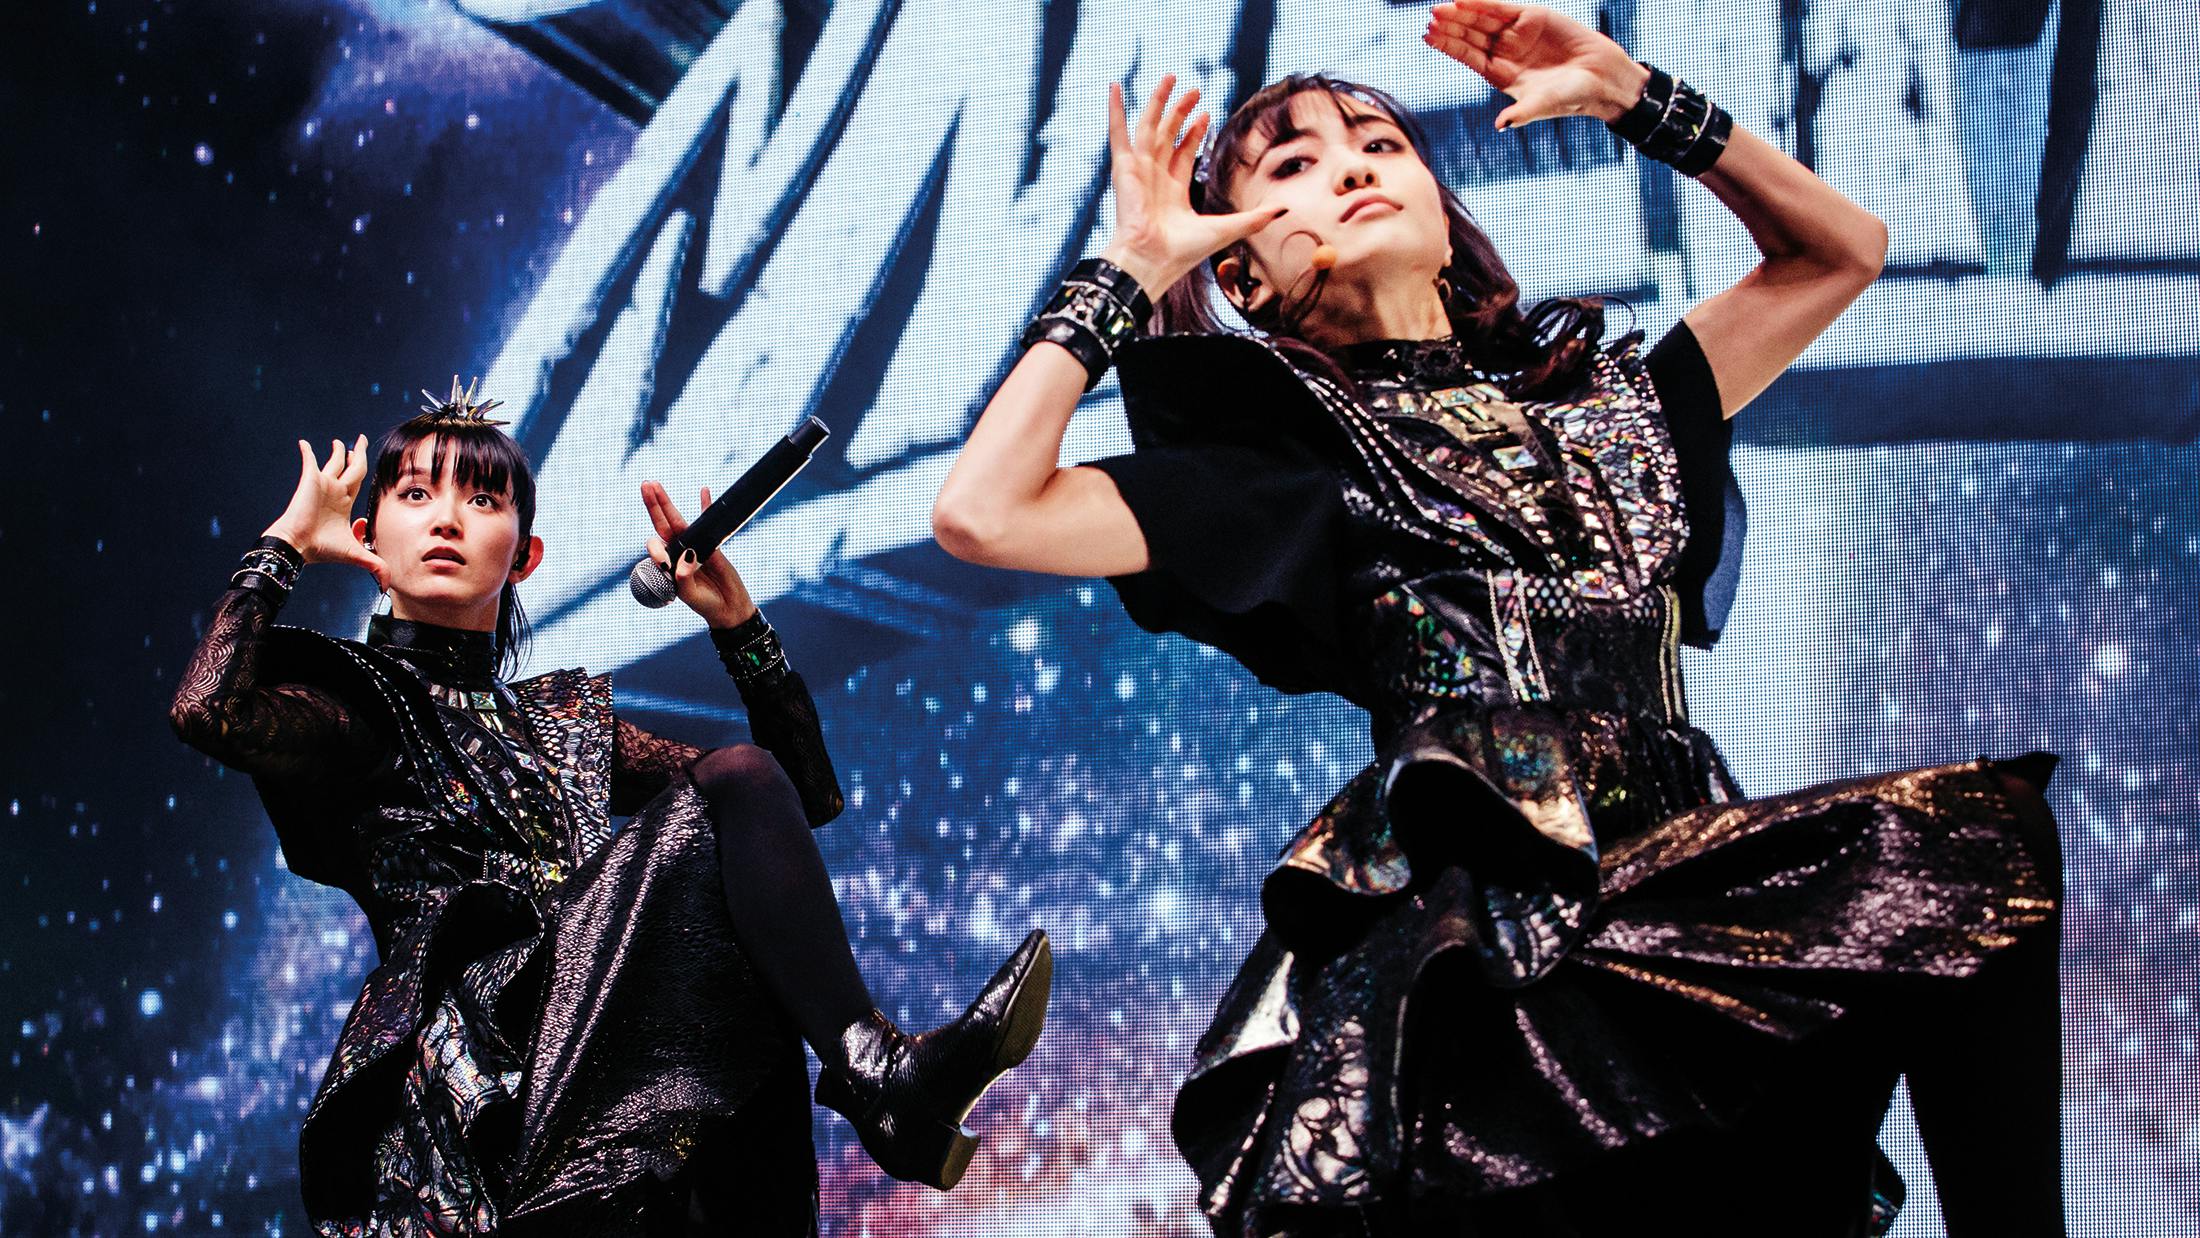 BABYMETAL to "disappear from our sight" on October 10